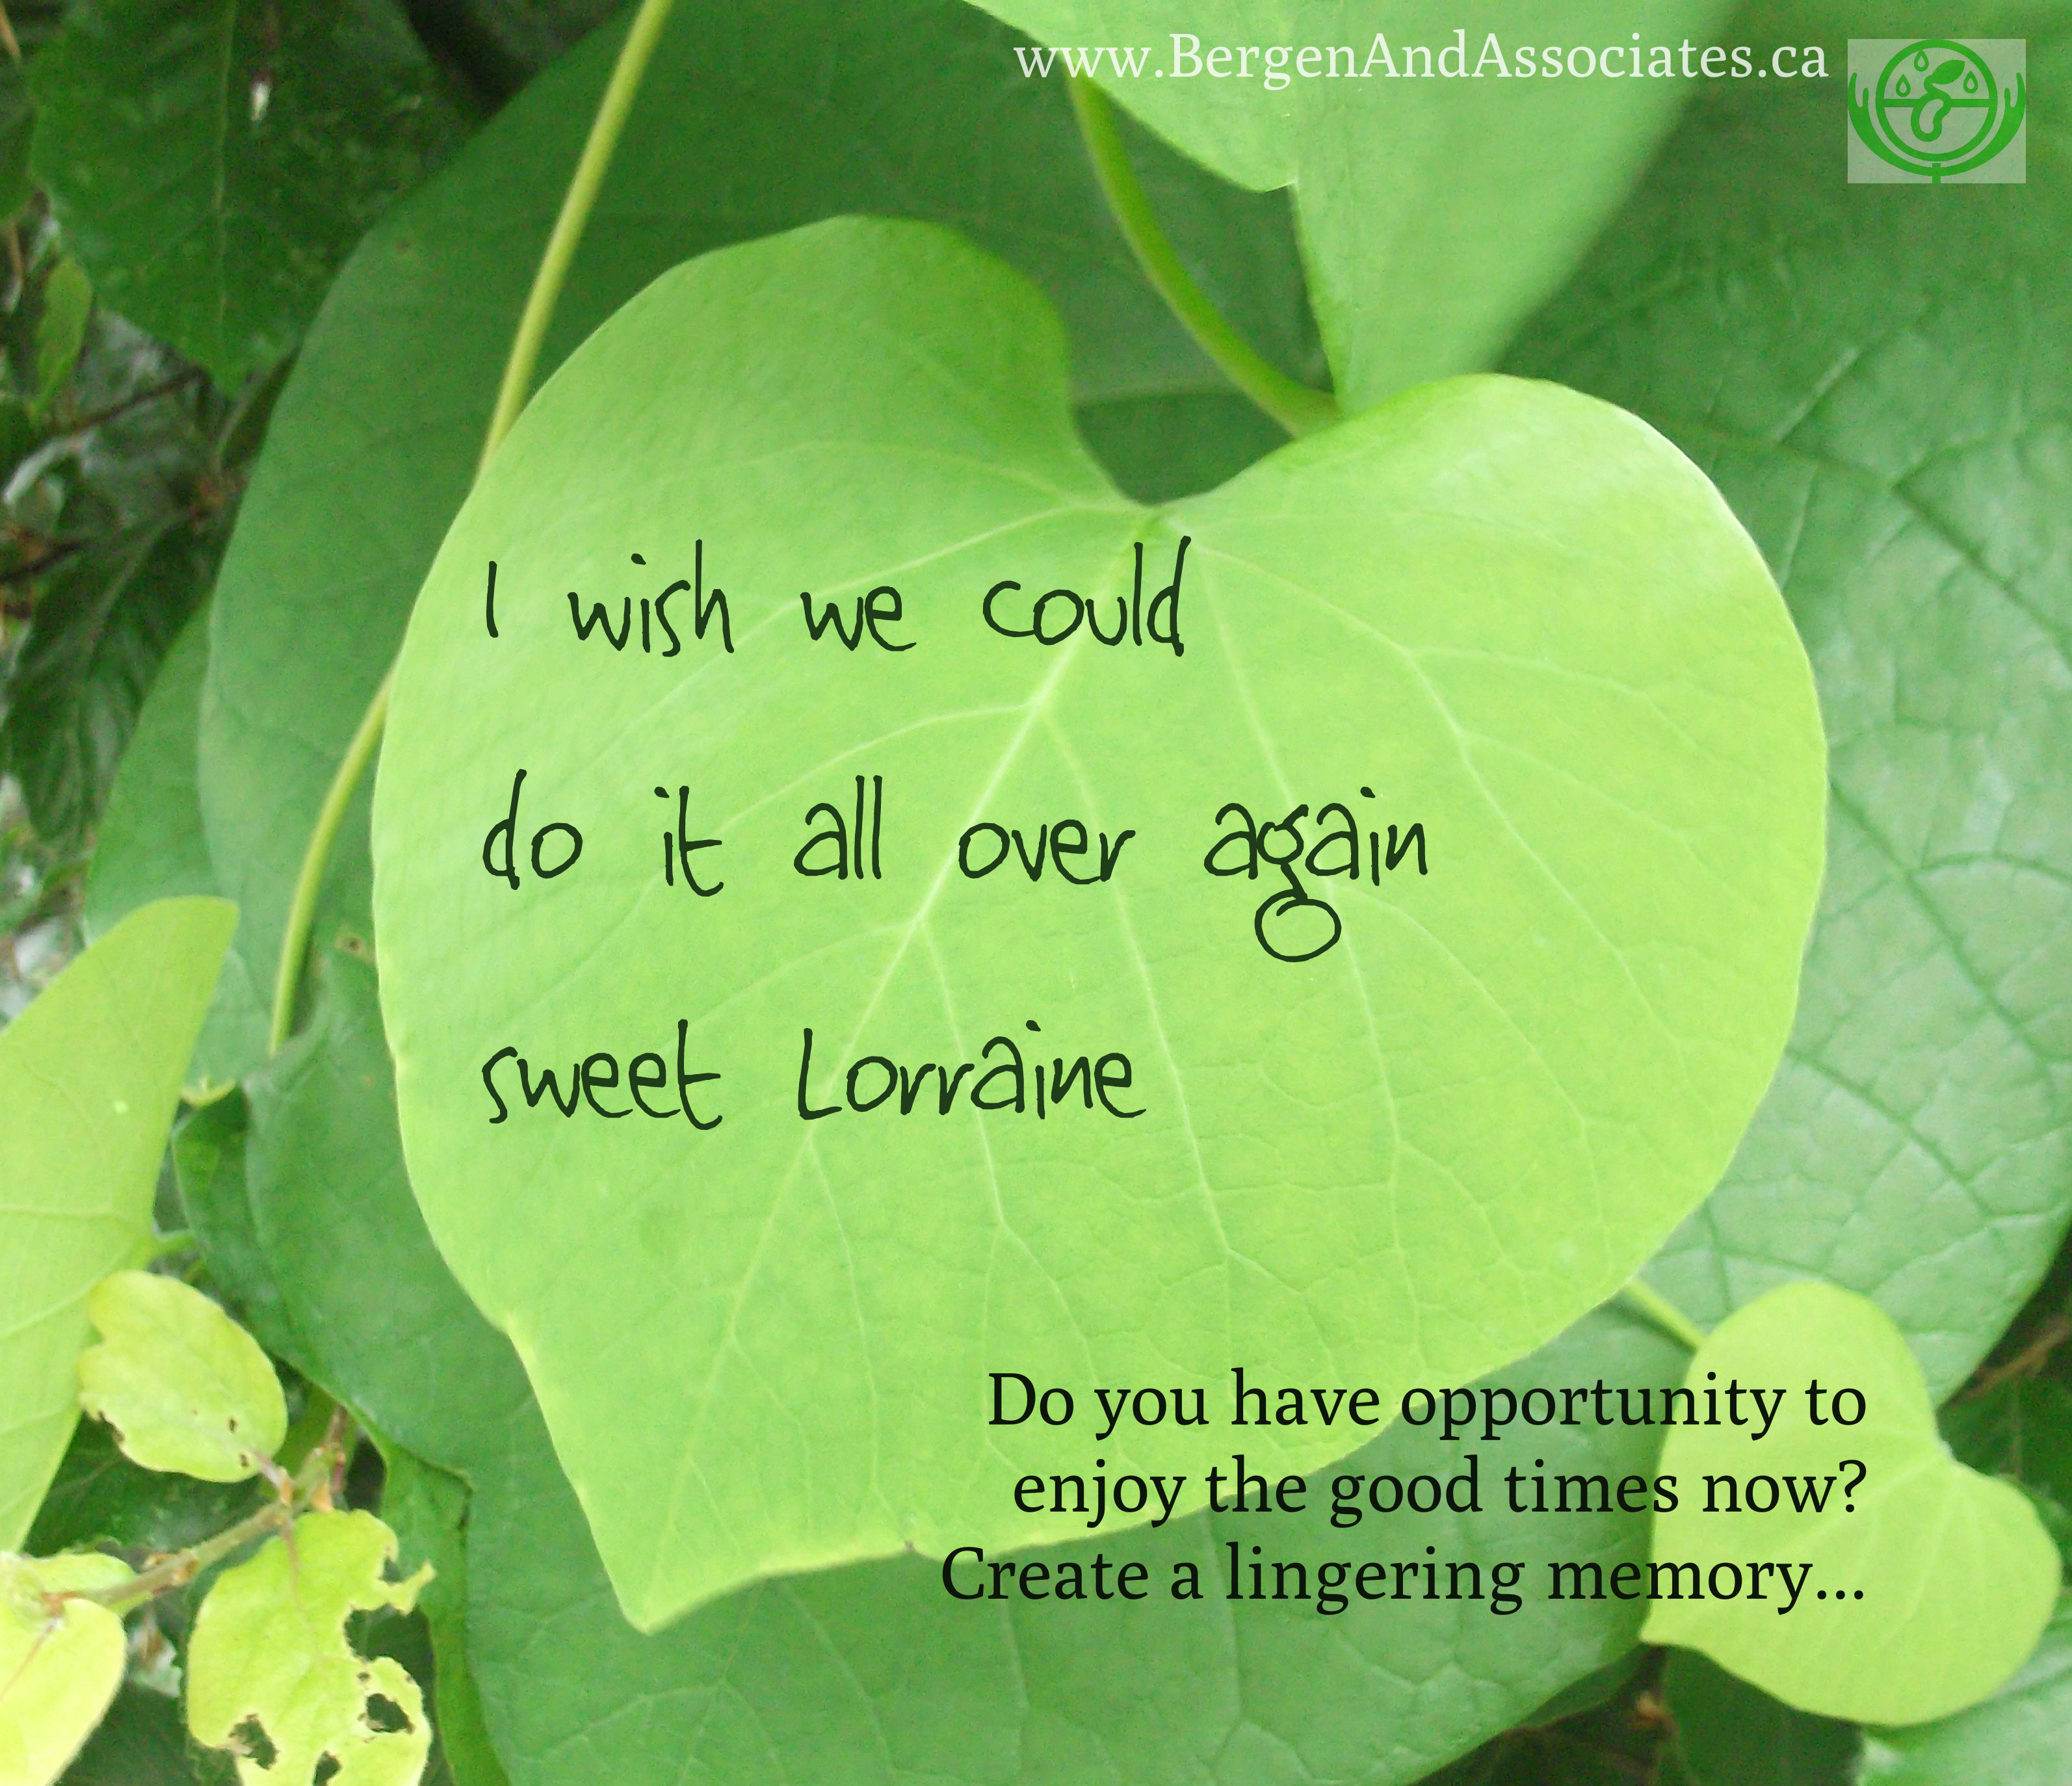 Quote from Fred that says, "II wish we could do it all over again, sweet Lorraine" Do you have opportunity to enjoy the good times now? Create a lingering memory!